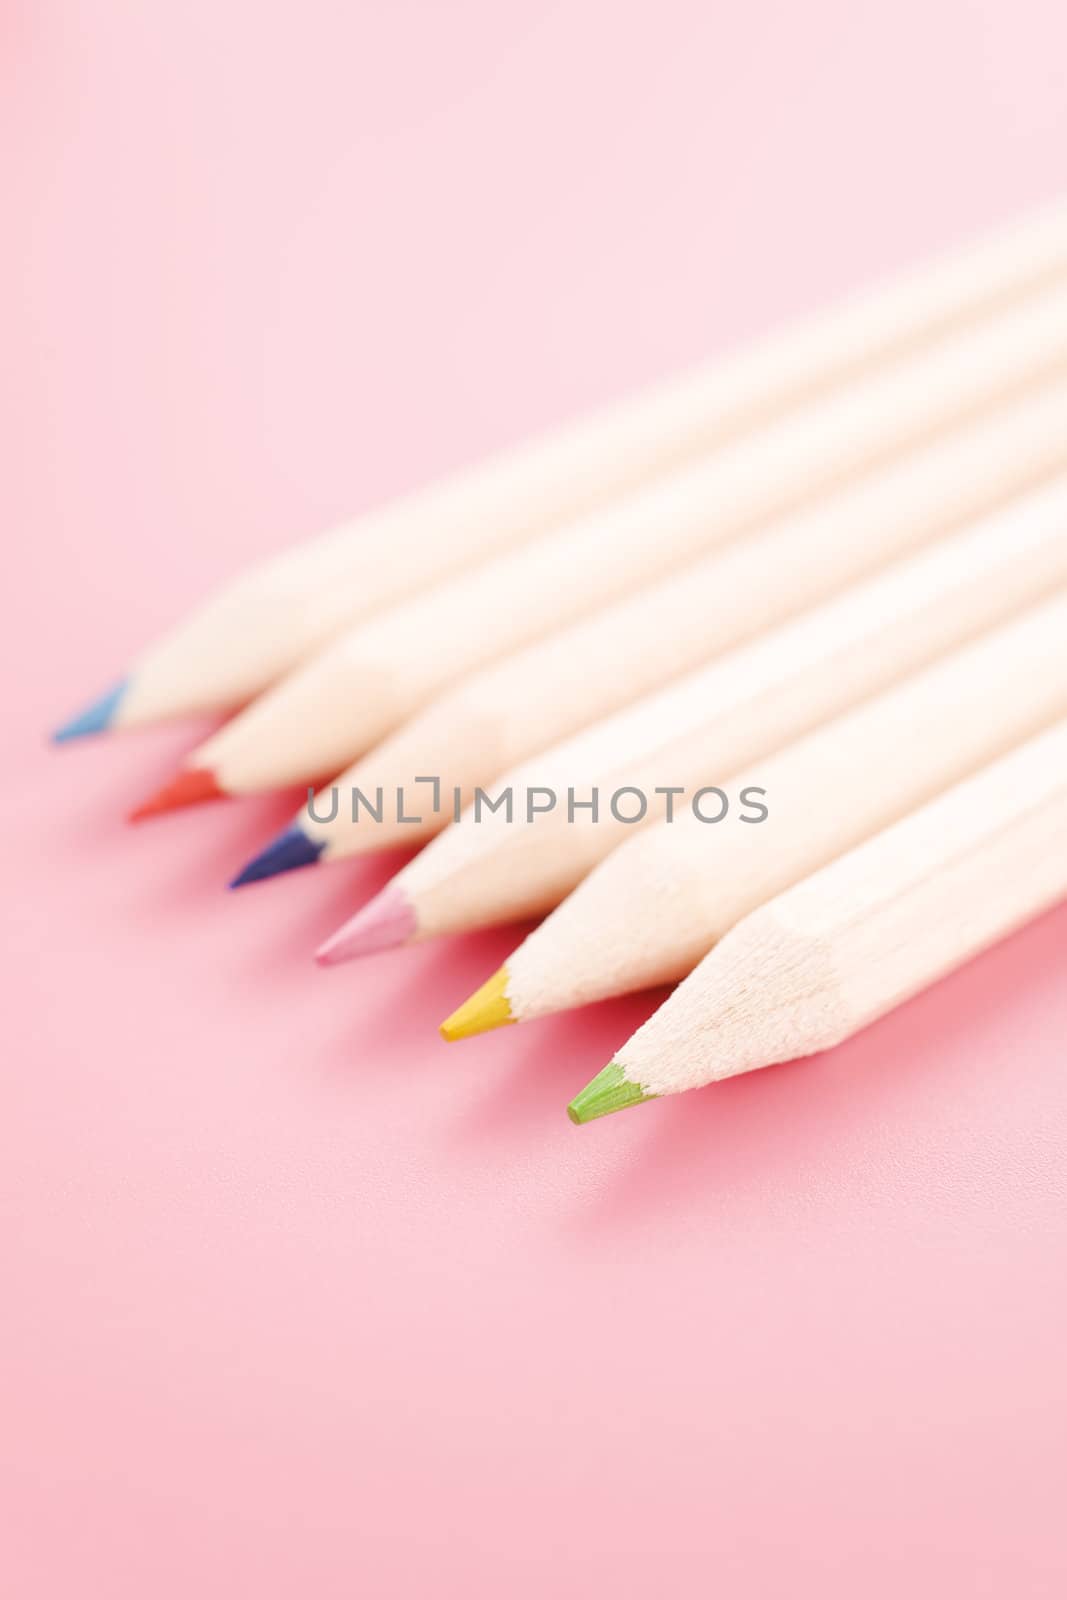 Pile of pencils by mjp